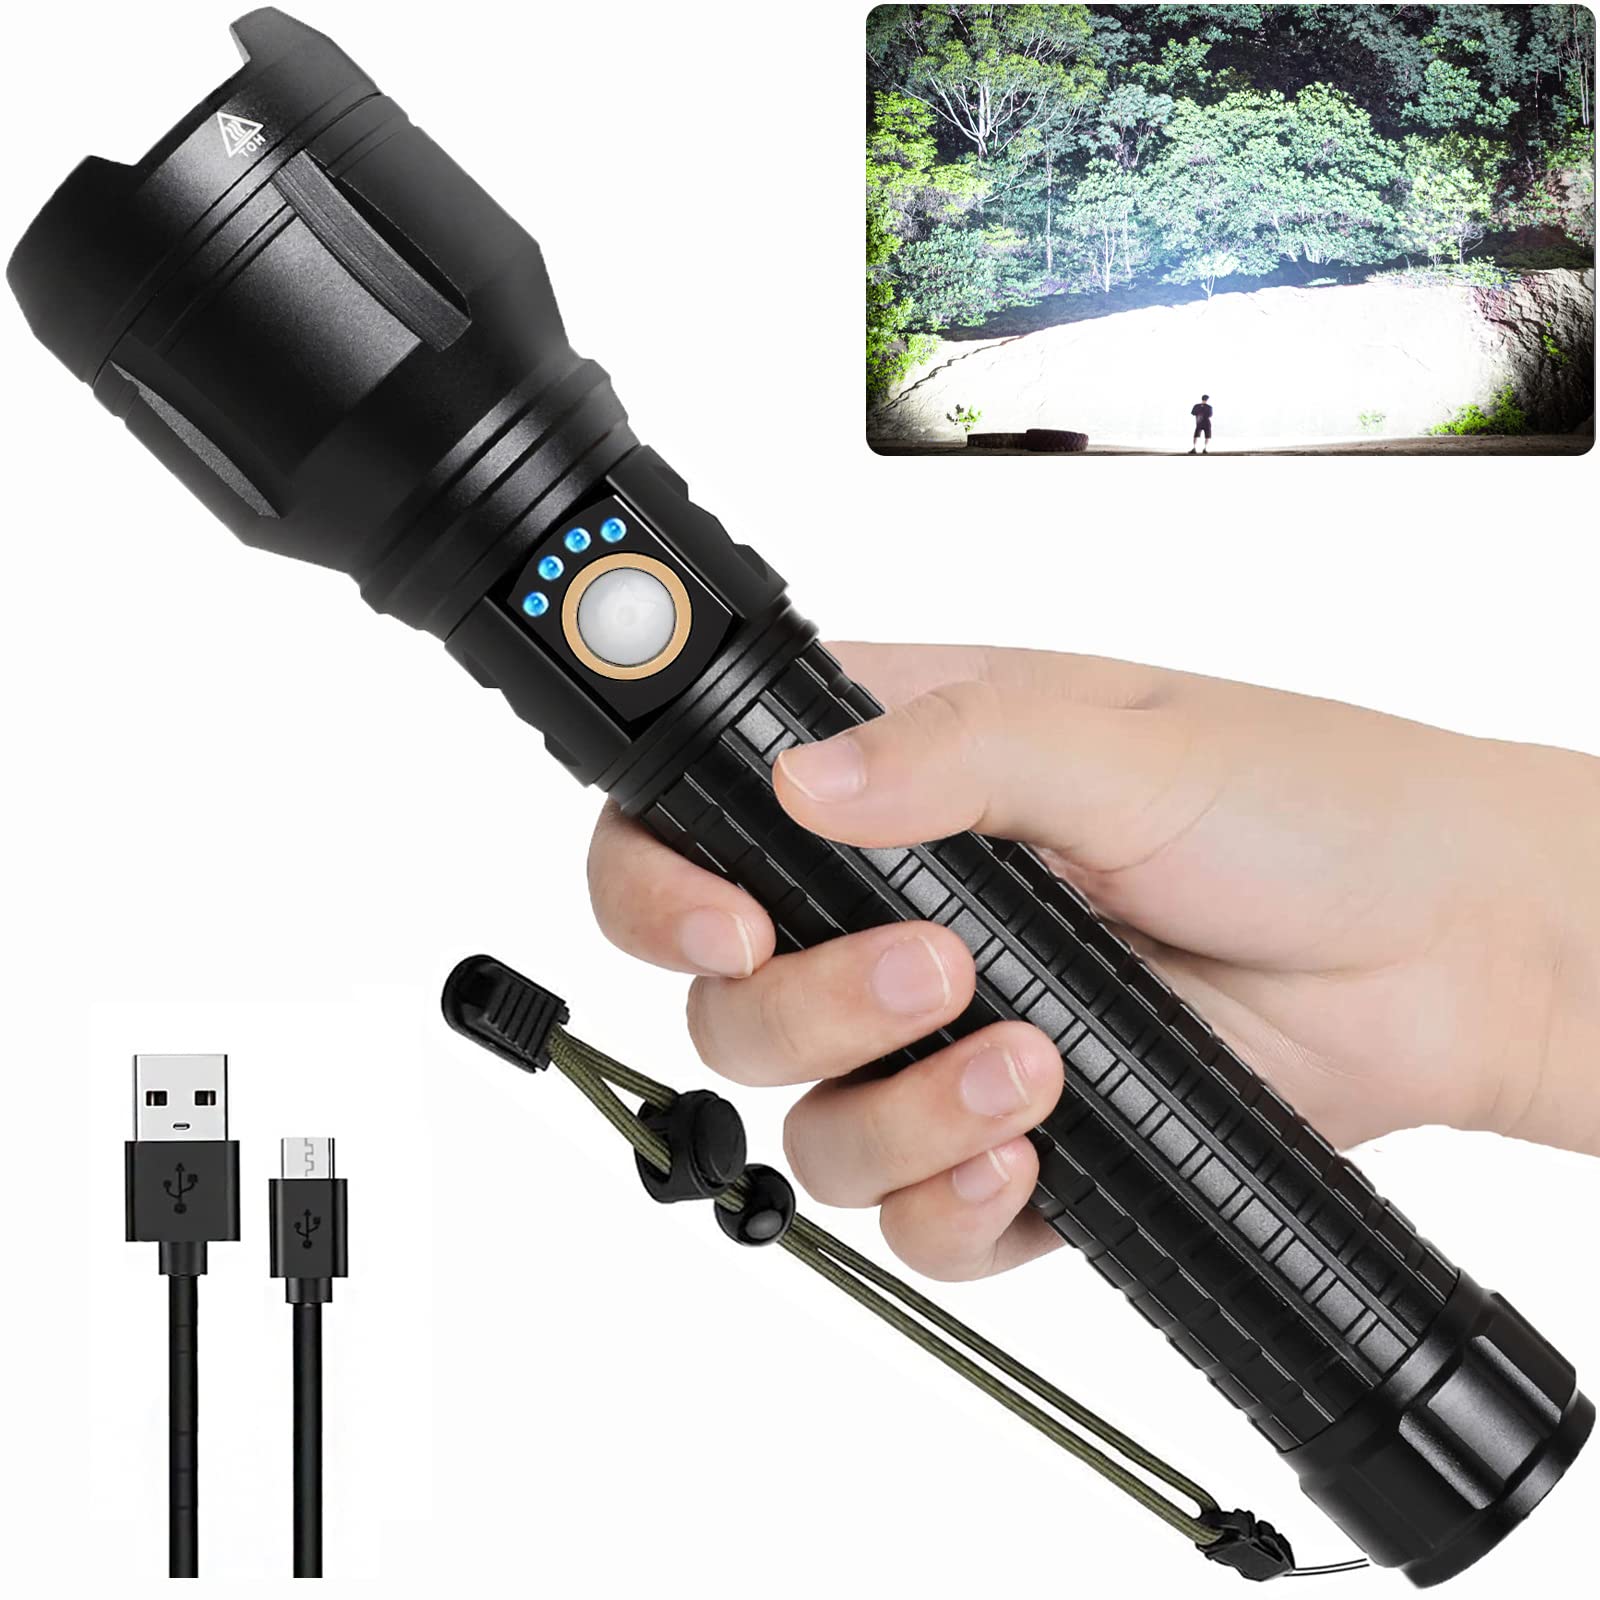 LED Flashlights,Super Bright for Camping and Hiking with IPX7